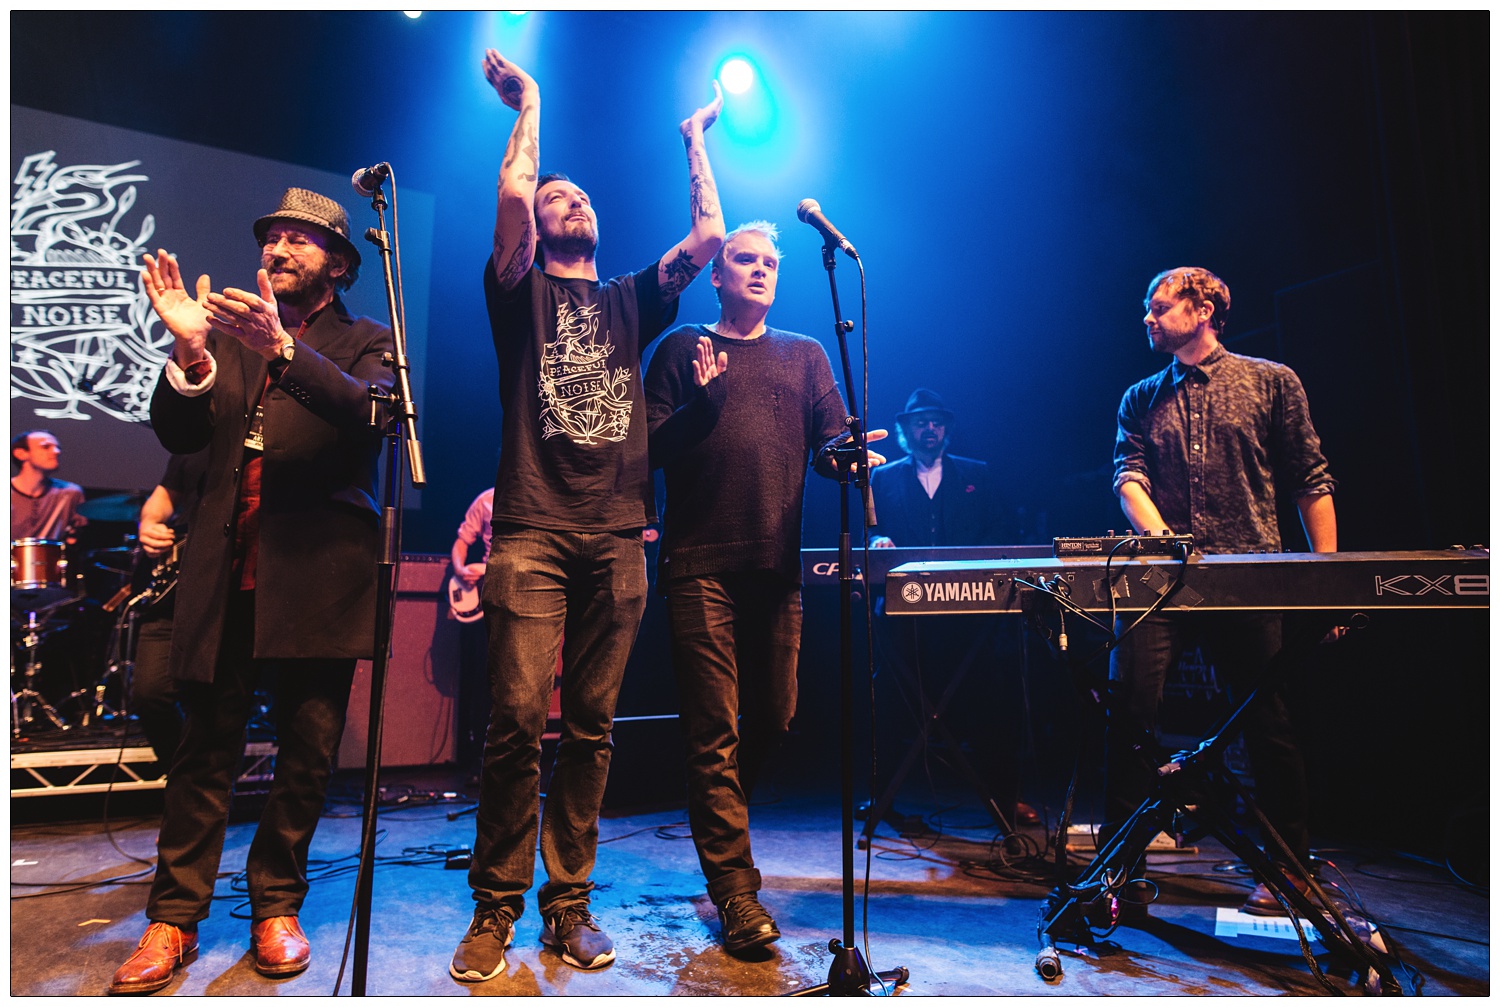 Lukas Wooller and Chas Hodges behind keyboards and Dave Peacock and Frank Turner clapping at A Peaceful Noise gig